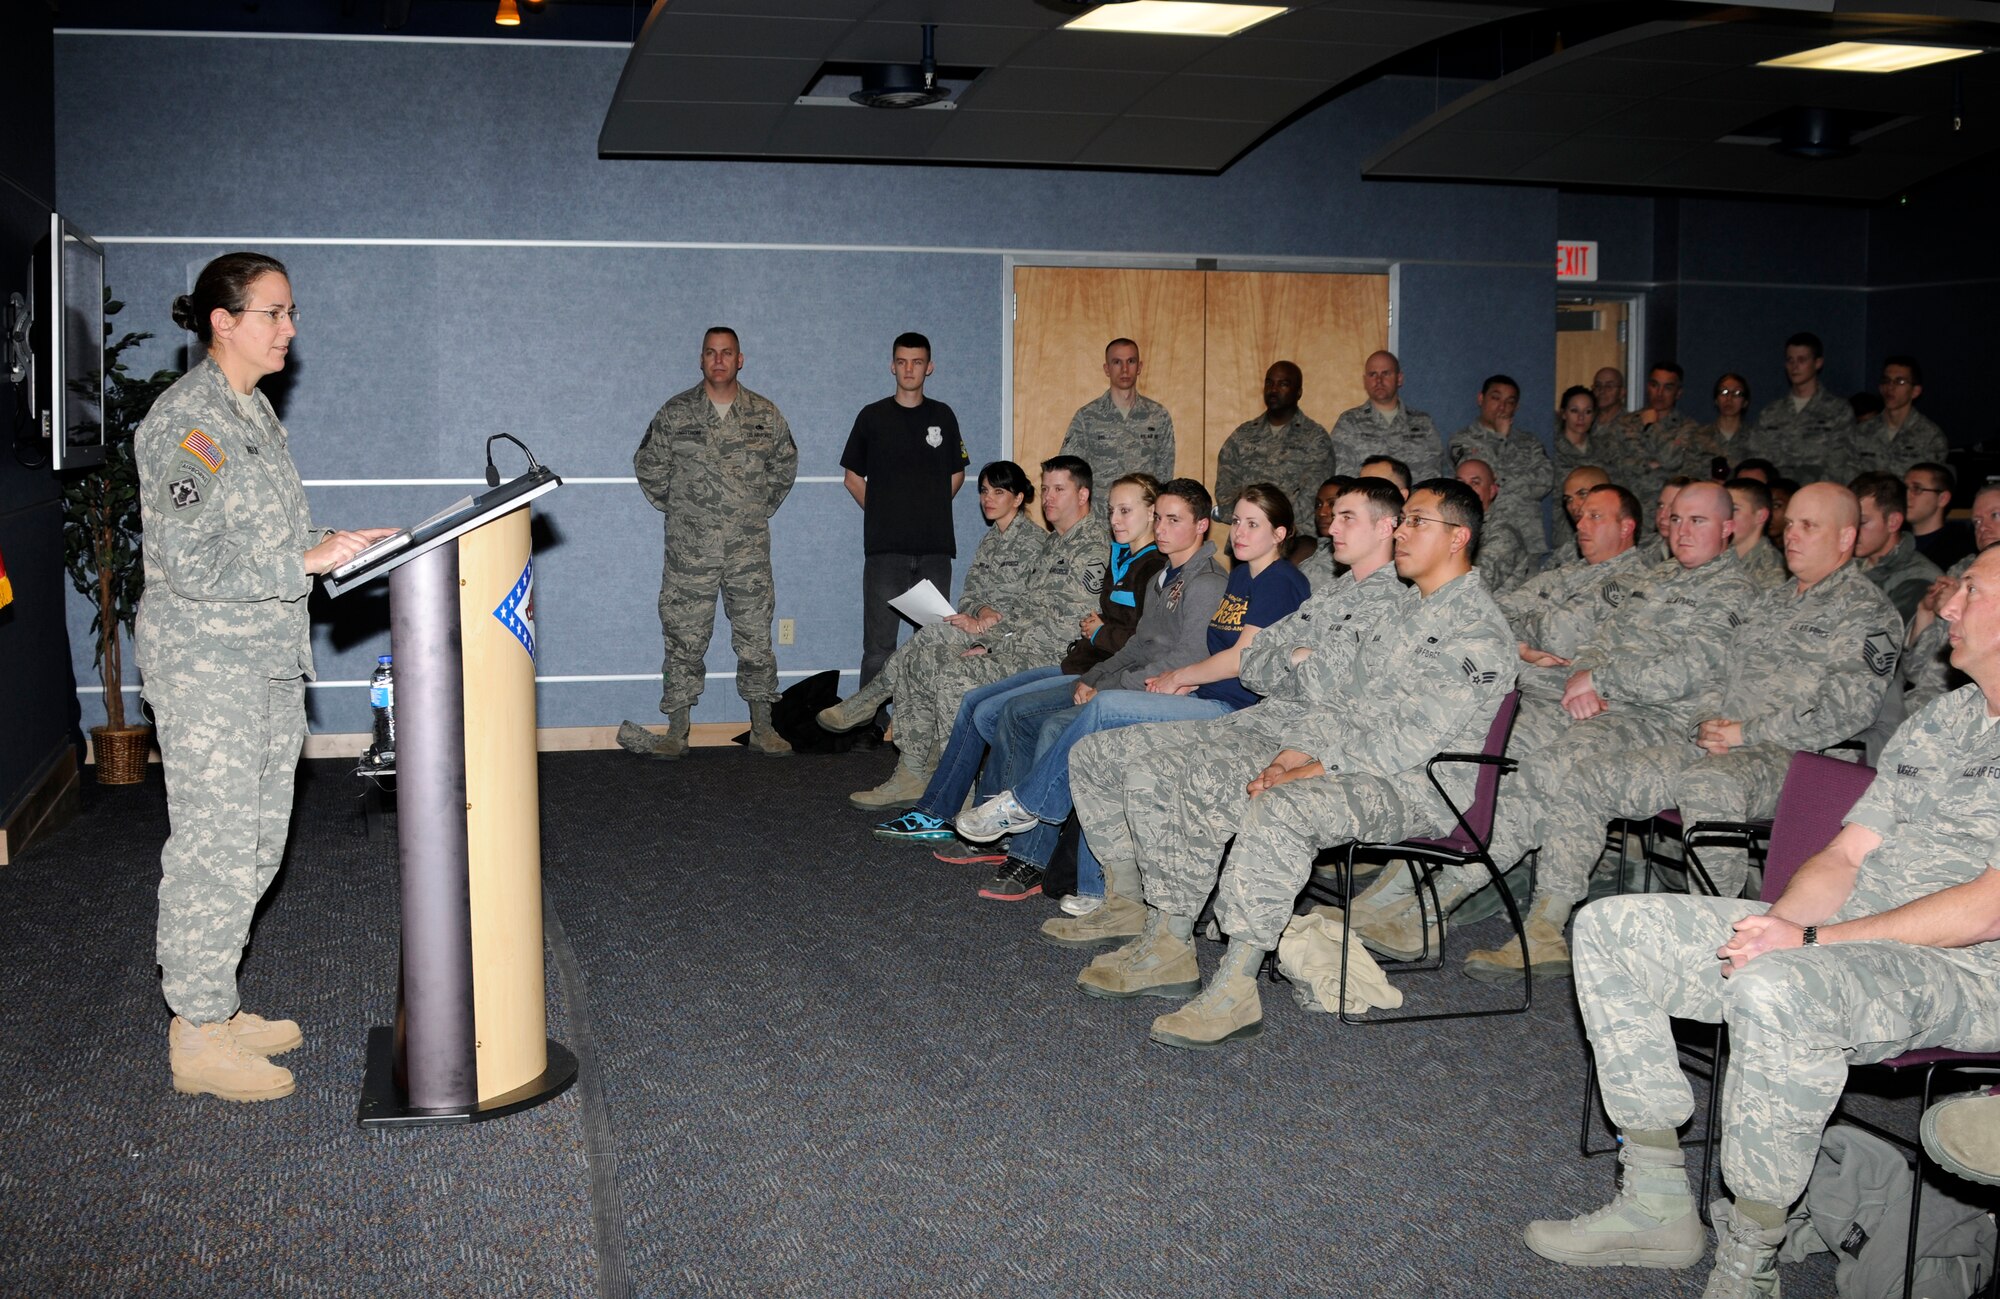 Brig. Gen. Patricia M. Anslow speaks at the 188th Fighter Wing during a Women's History Month program March 2, 2013. Anslow is the first female general officer in the Arkansas National Guard. (National Guard photo by 1st Lt. Holli Snyder/188th Fighter Wing Public Affairs)